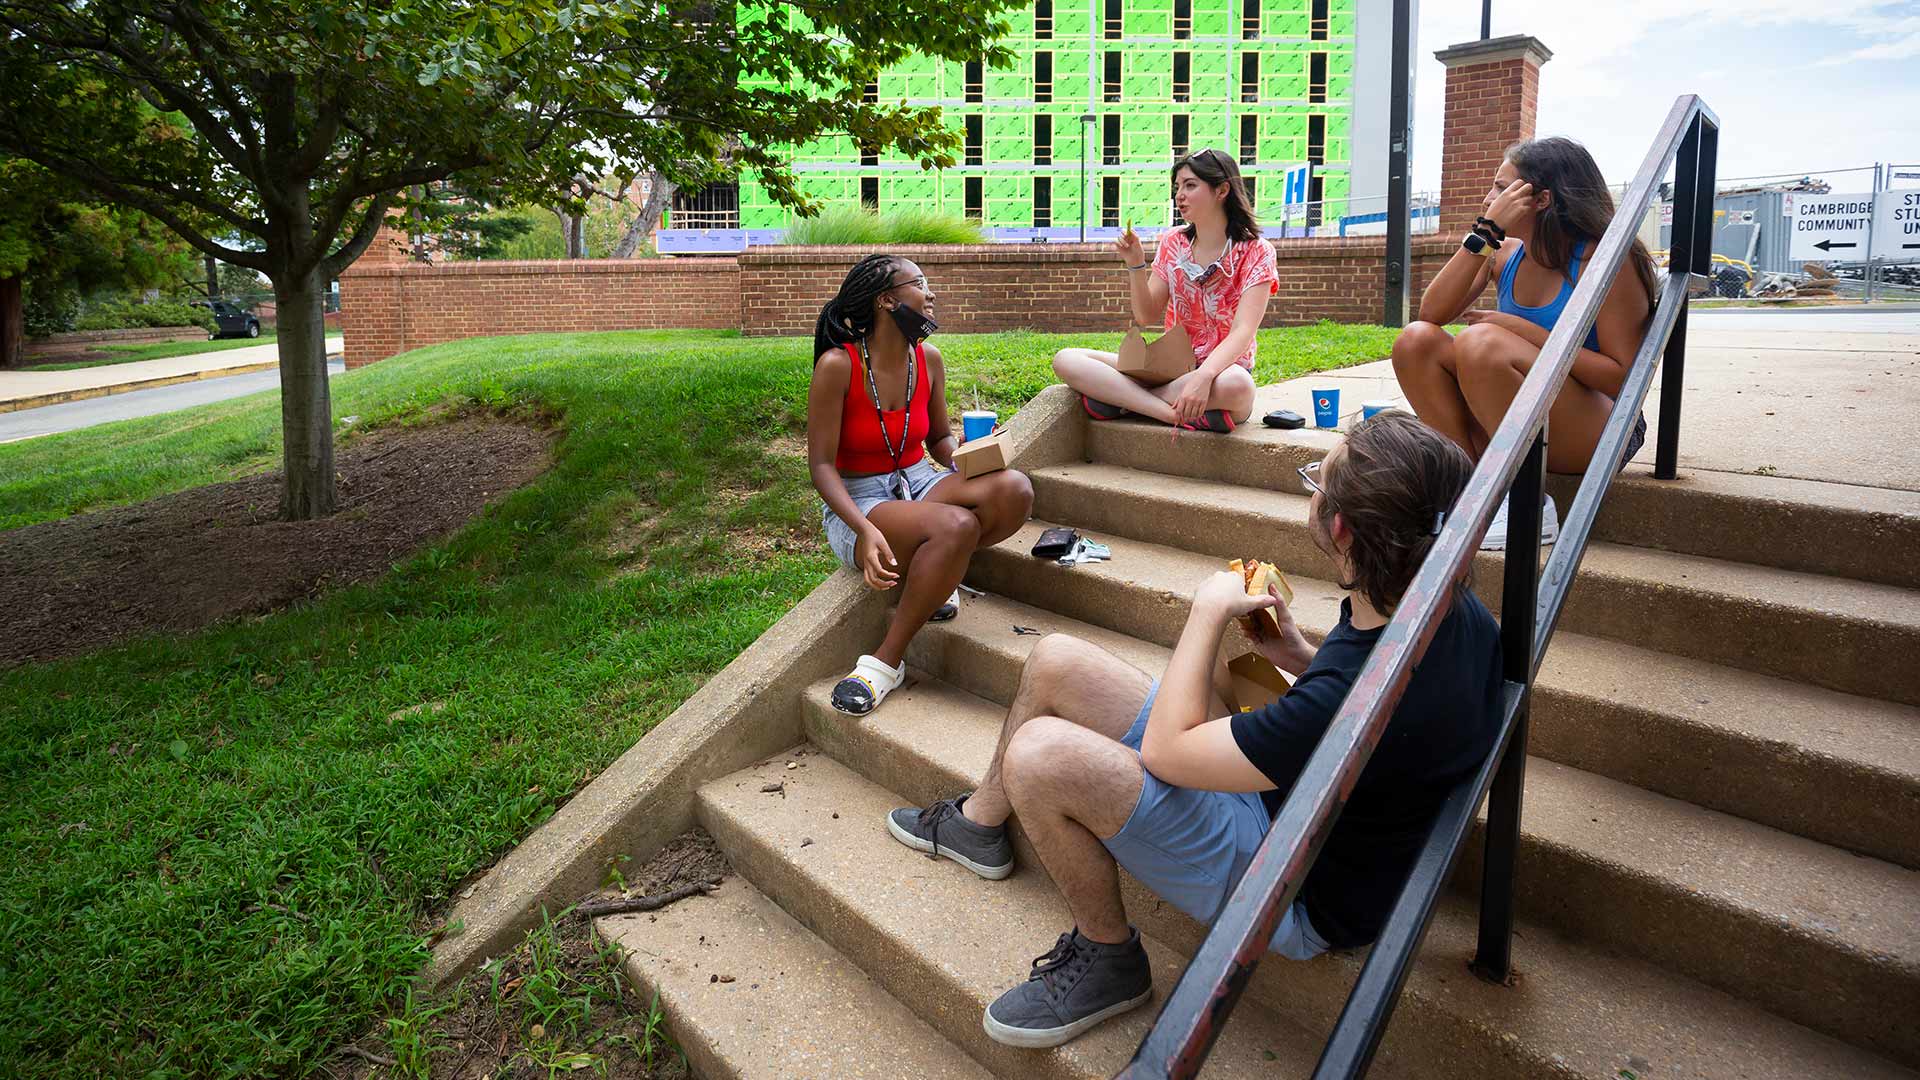 Students sit and eat on stairs outside